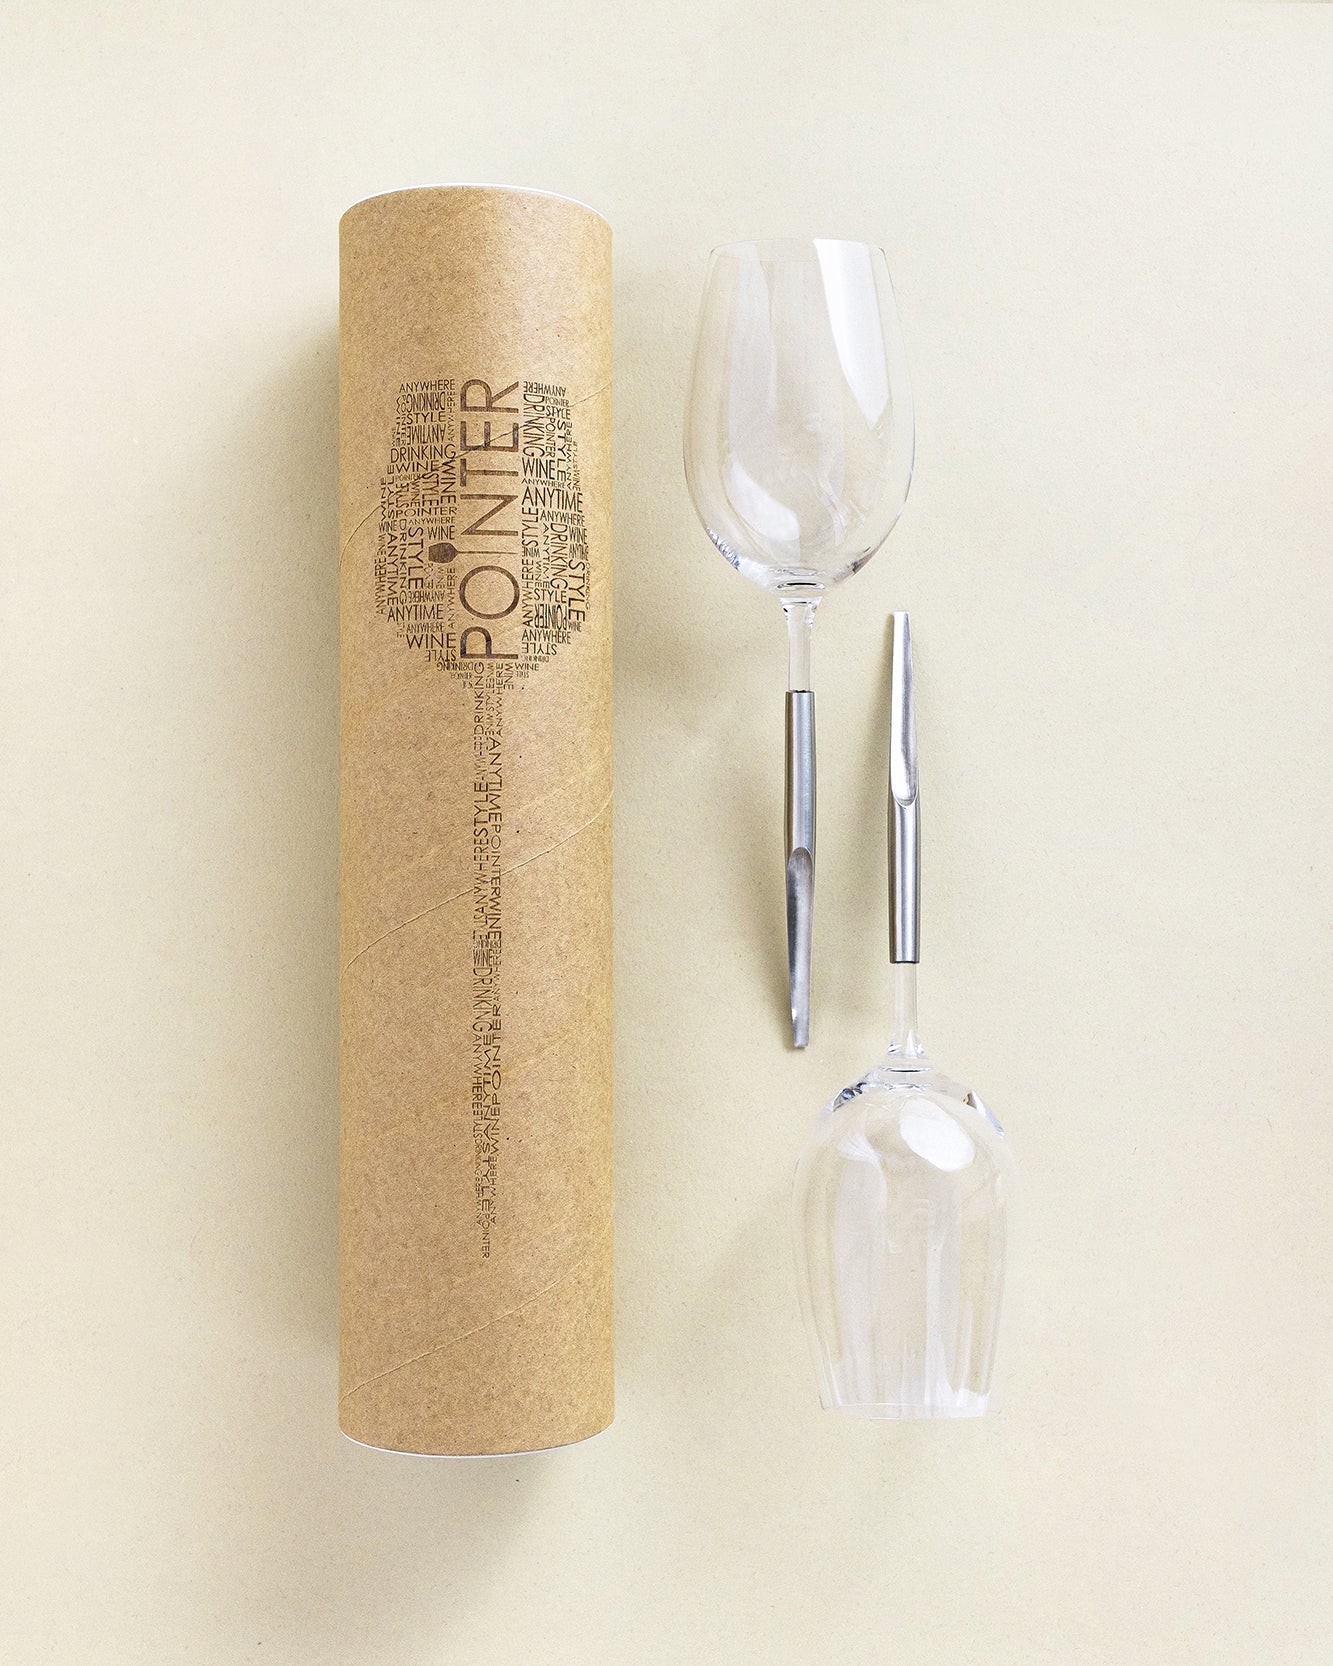 2 picnic wine glasses with metal pins placed horizontally next to each other and next to the packing cylinder box